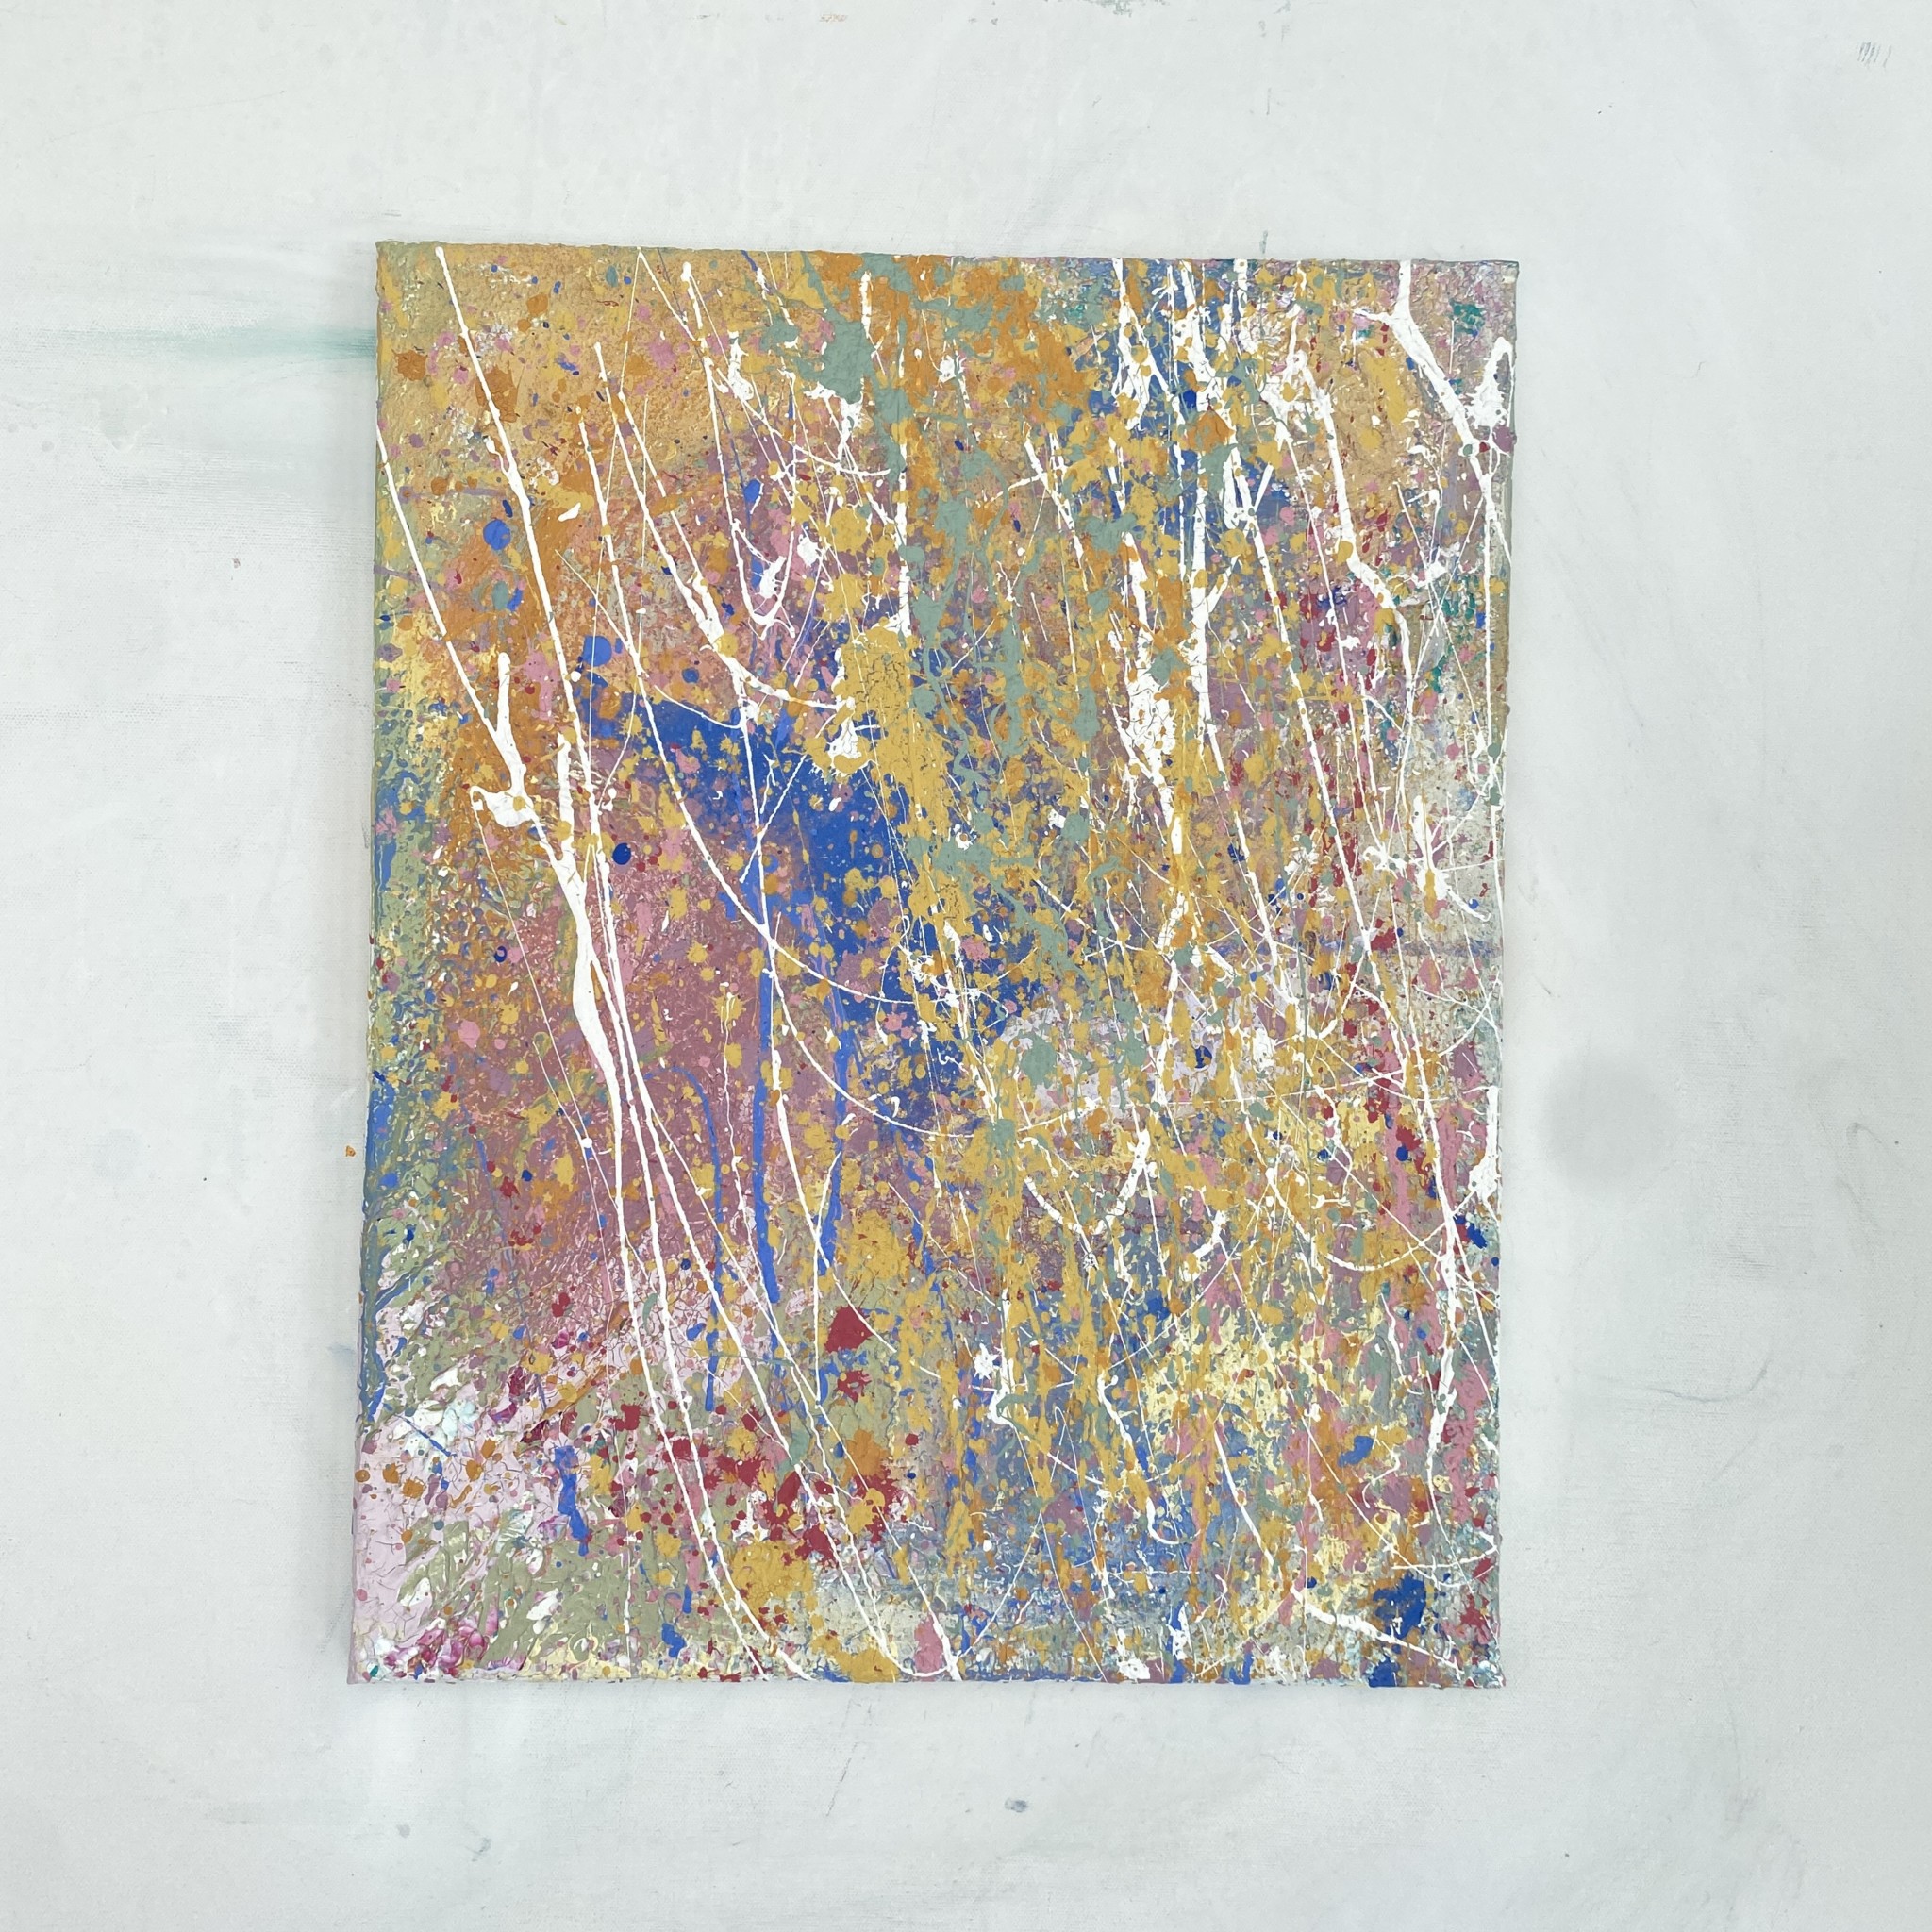 Gallery view of elemental an abstract original painting created with eco friendly paints by Emily Duchscherer Kirk.